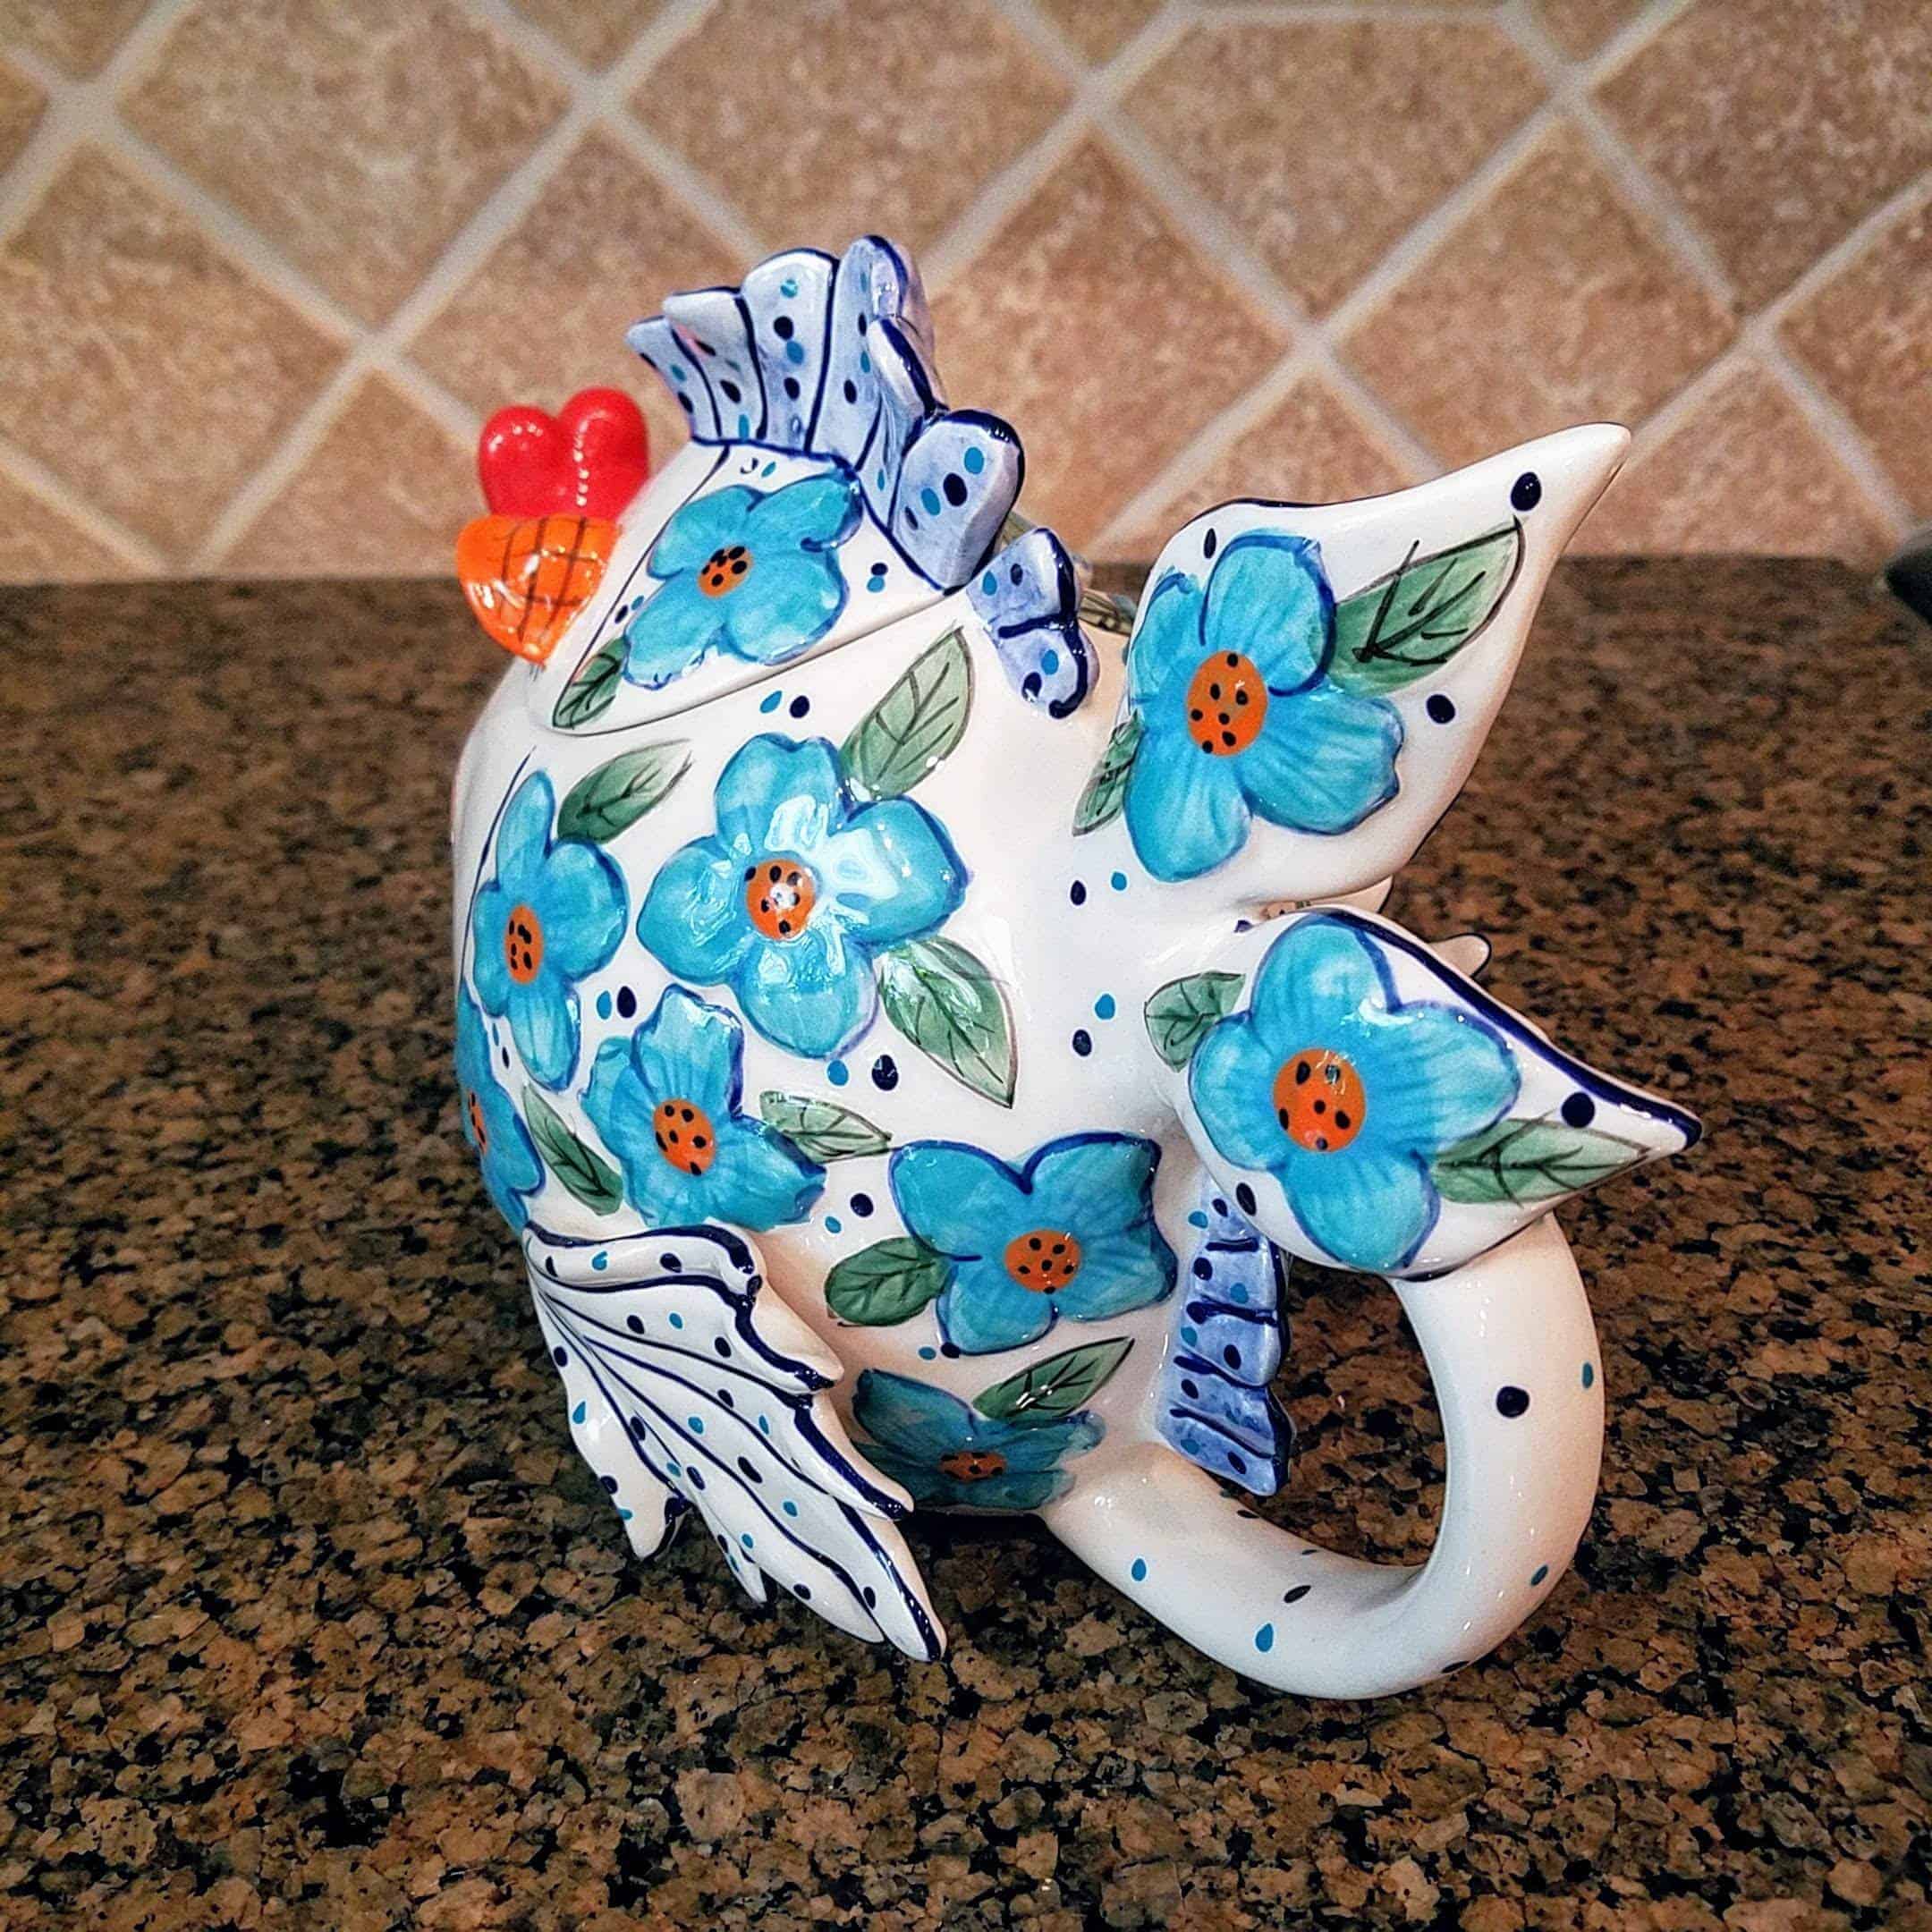 This Flower Fish Teapot is made with love by Premier Homegoods! Shop more unique gift ideas today with Spots Initiatives, the best way to support creators.